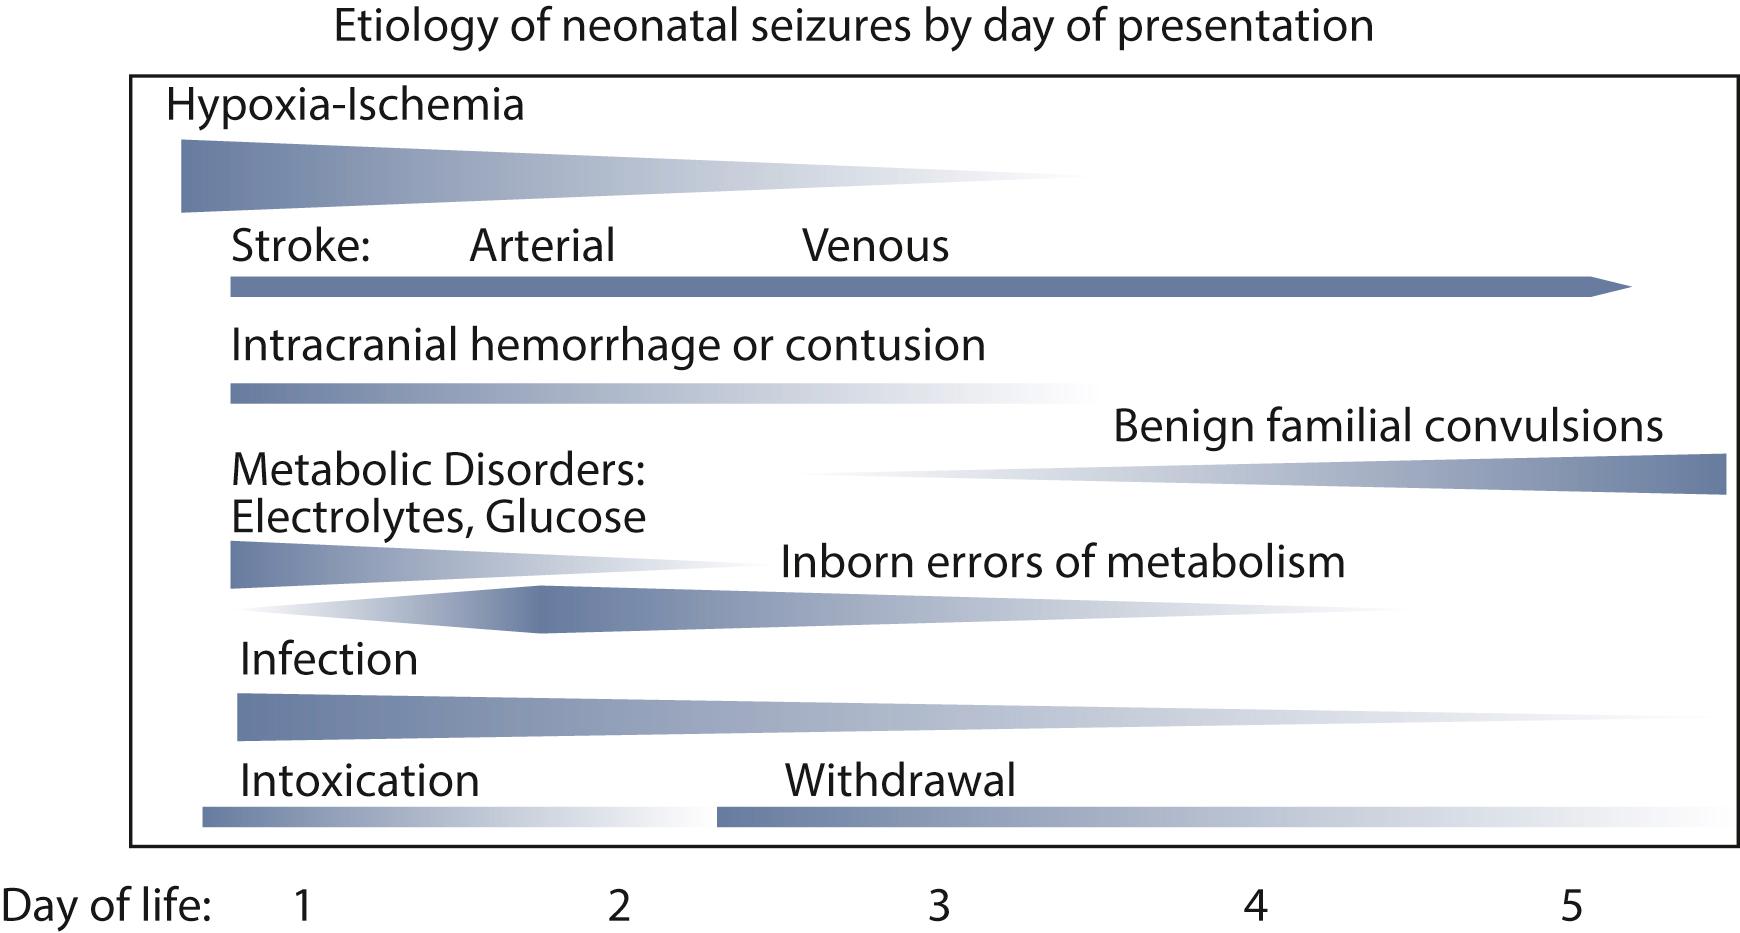 Fig. 110.2, Common Etiologies of Neonatal Seizures. The most common etiologies of neonatal seizures are plotted by their most common day(s) of presentation.